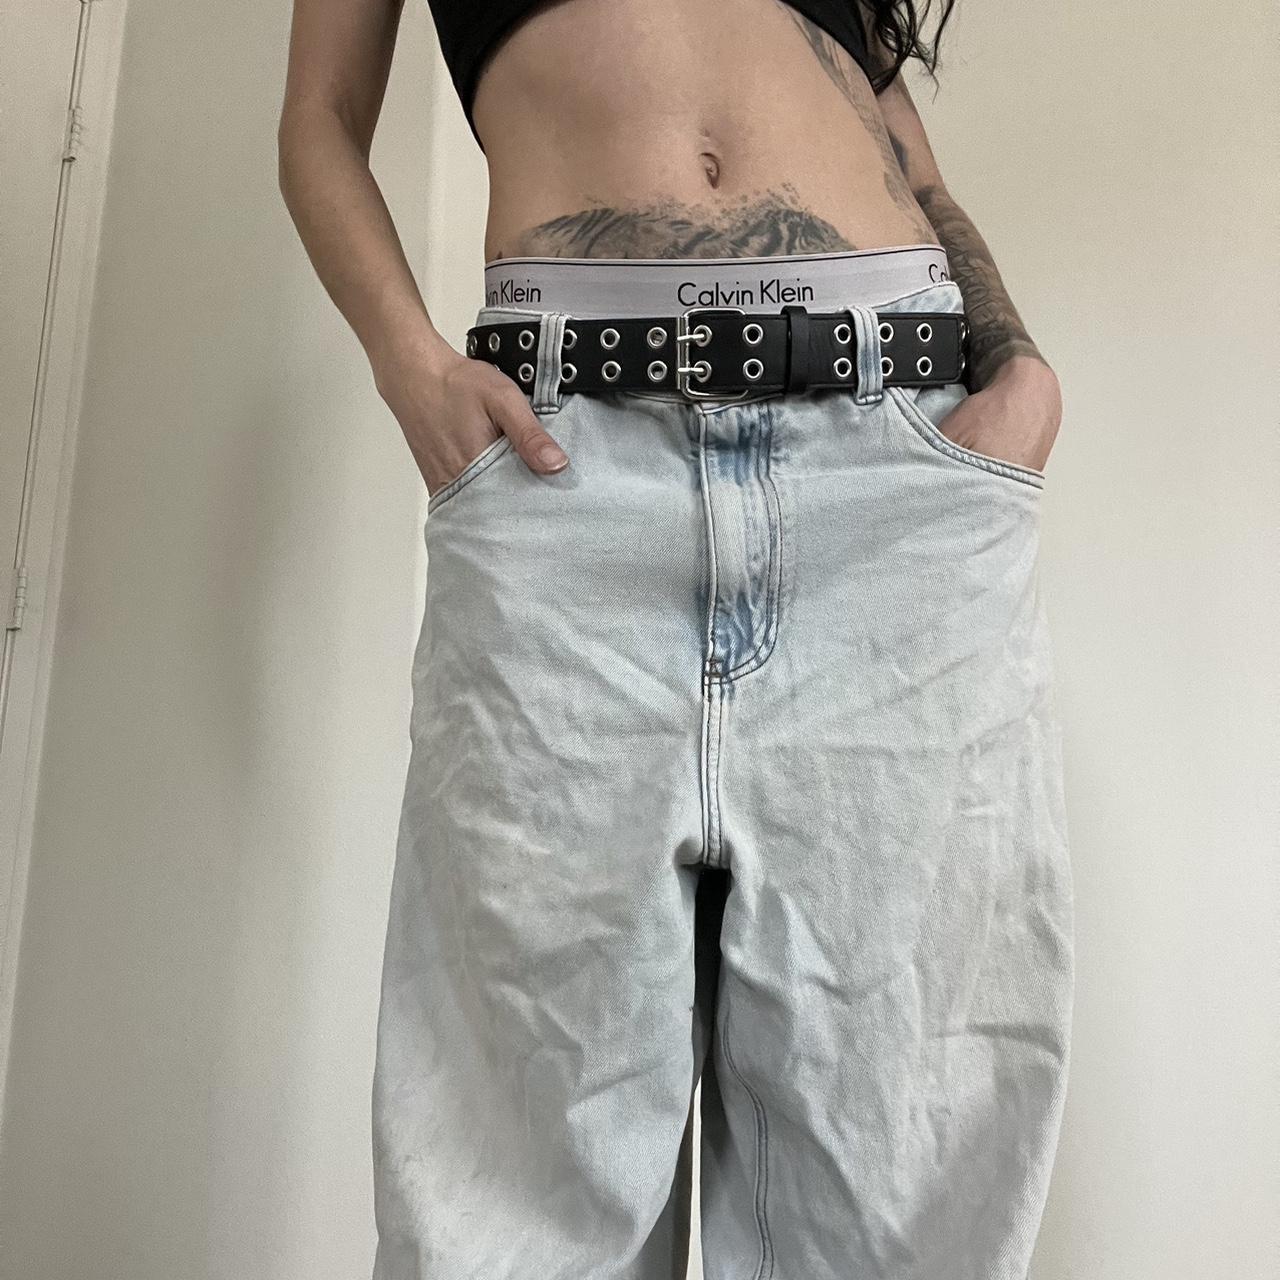 Insanely baggy super light wash Empyre jeans! Such a... - Depop